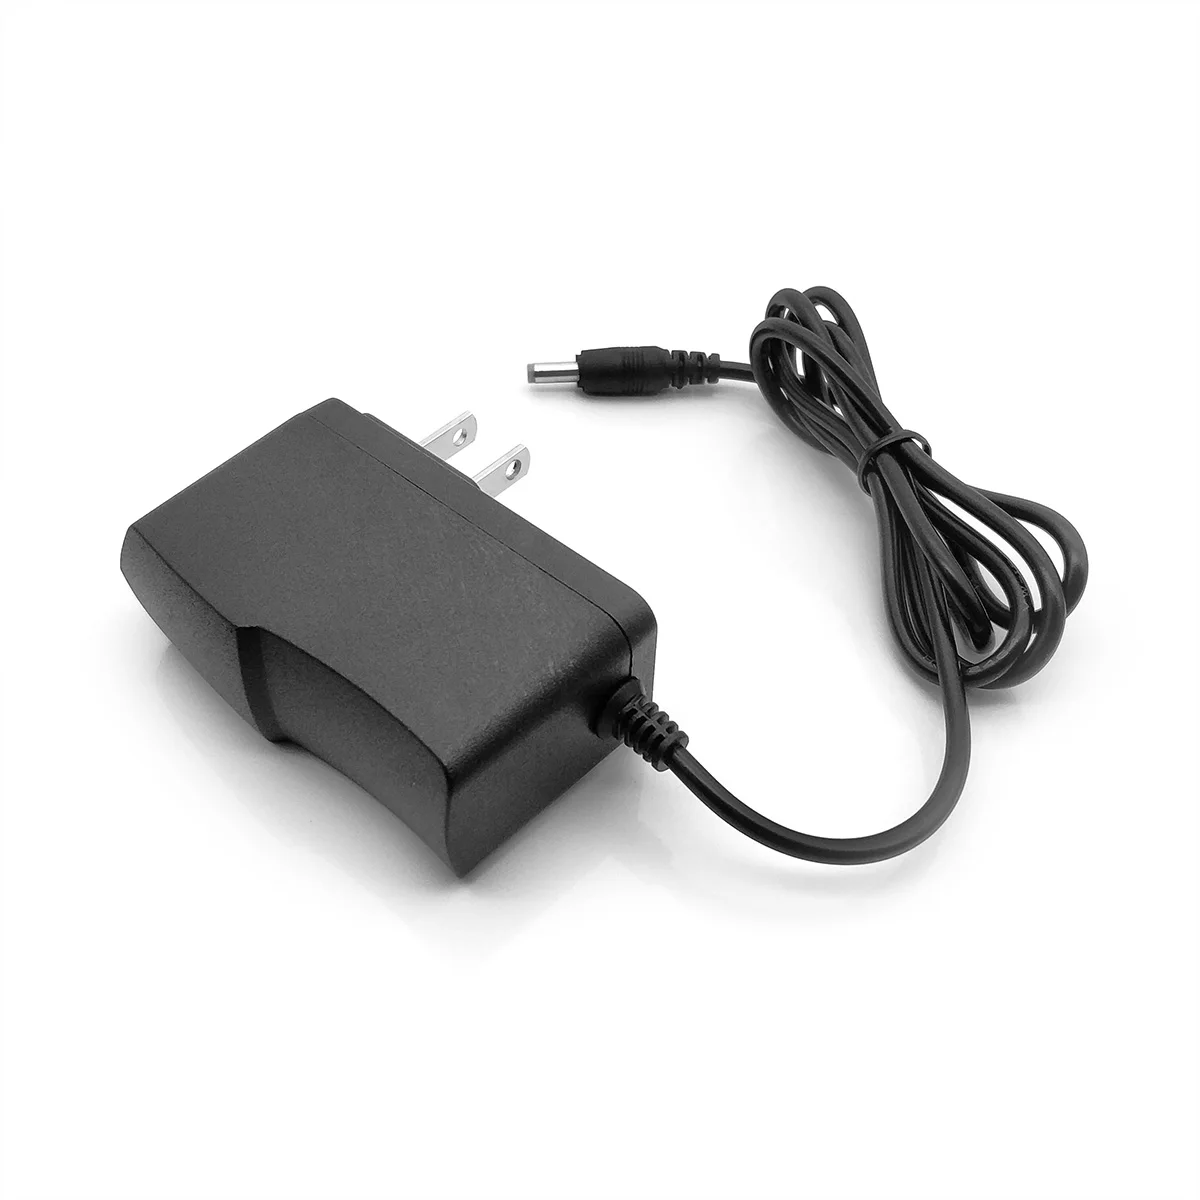 
AC DC Power Adapter 9V 5V 4.5V 4.2V 1A 1.5A 2A 3A OEM Input 100 240V AC 50/60Hz Power Supply Adapter for CCTV  (62170730943)